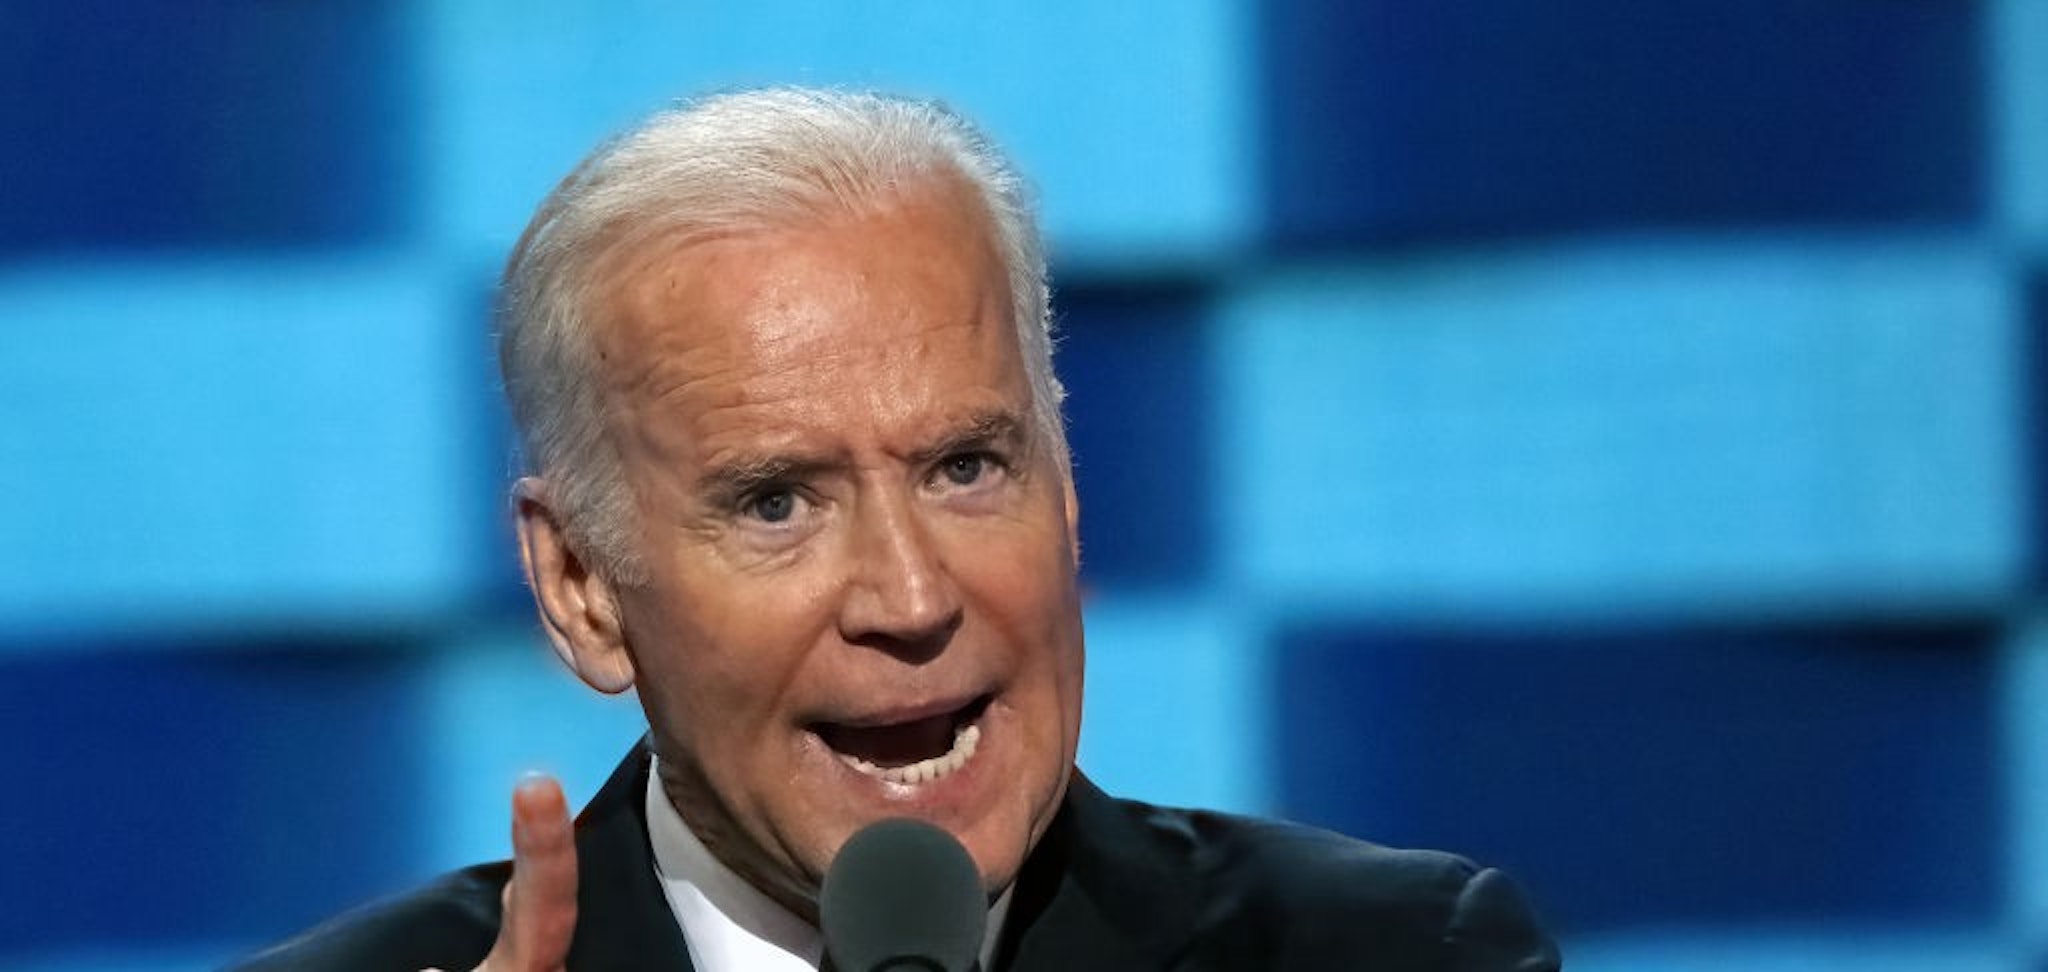 President Joseph "Joe" Biden addresses the delegates from the podium during the 3rd day of the Democratic National Nominating Convention in the Wells Fargo arena (Photo by